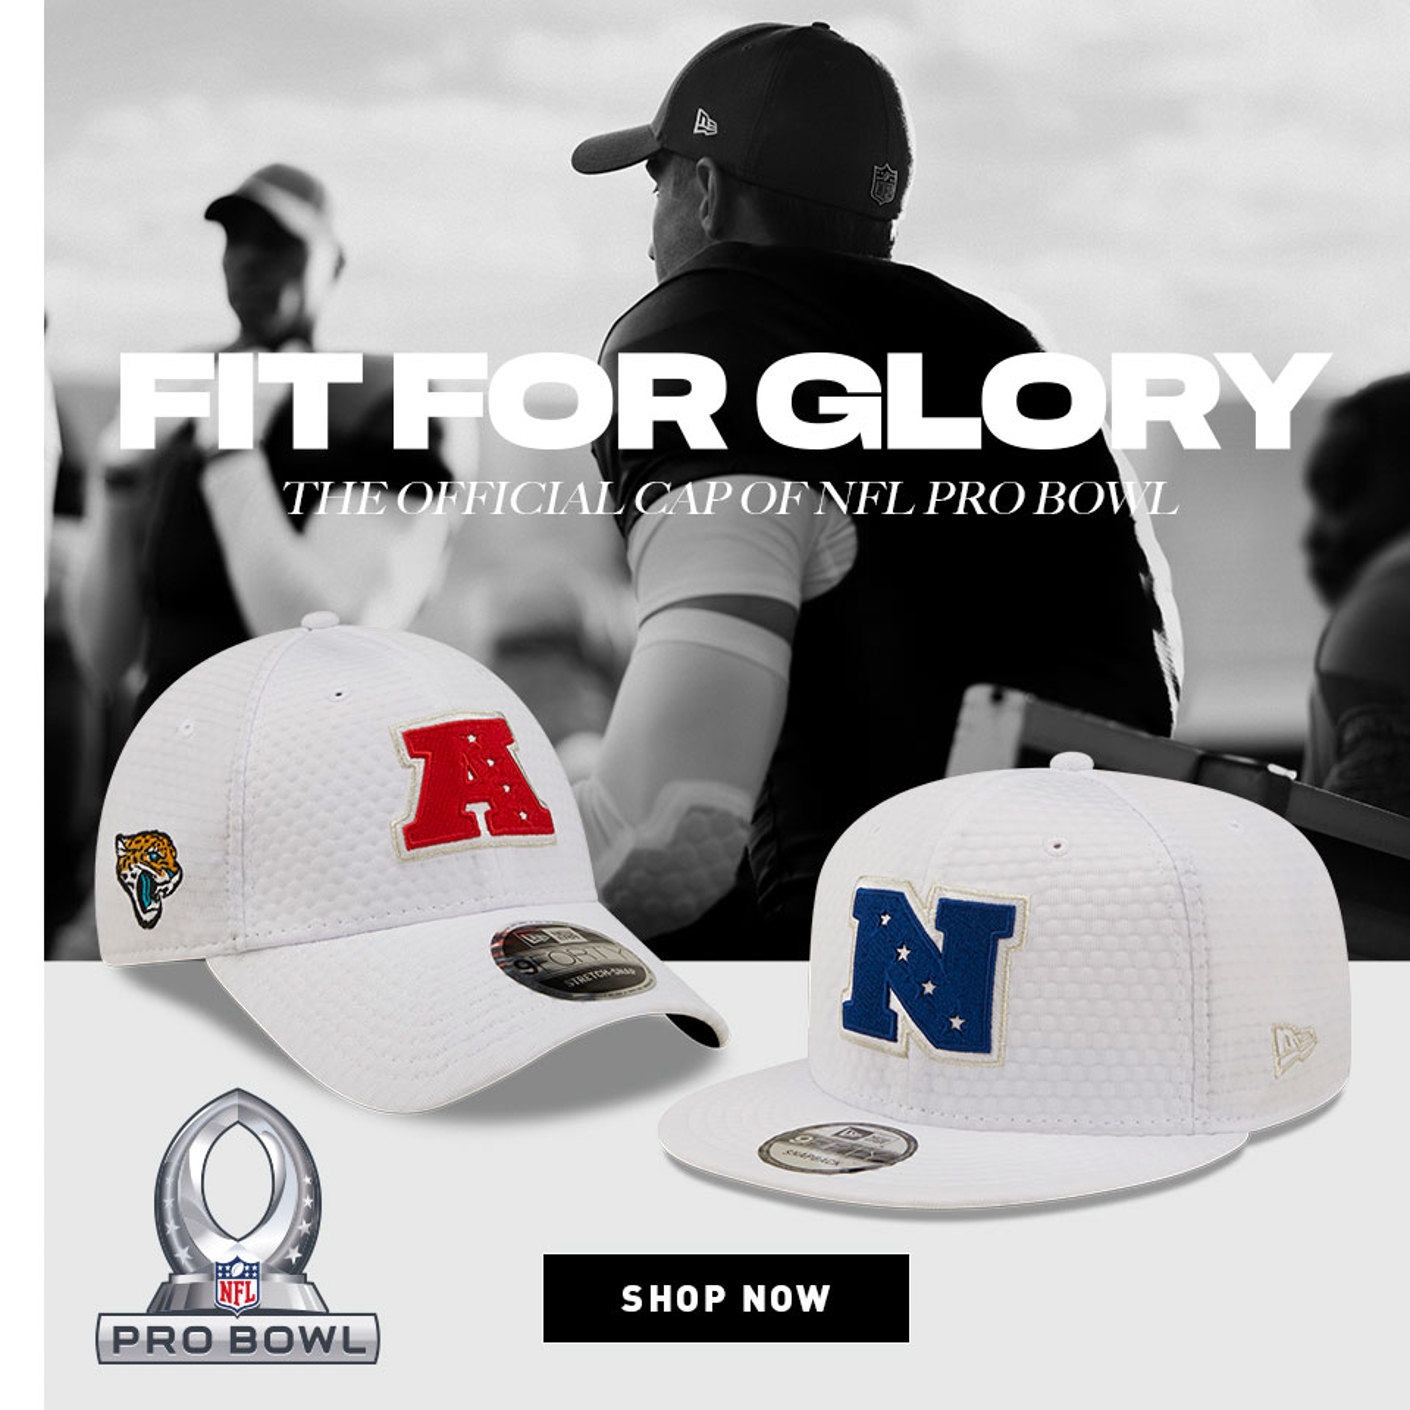 AFC and NFC adjustable and snapback New Era caps